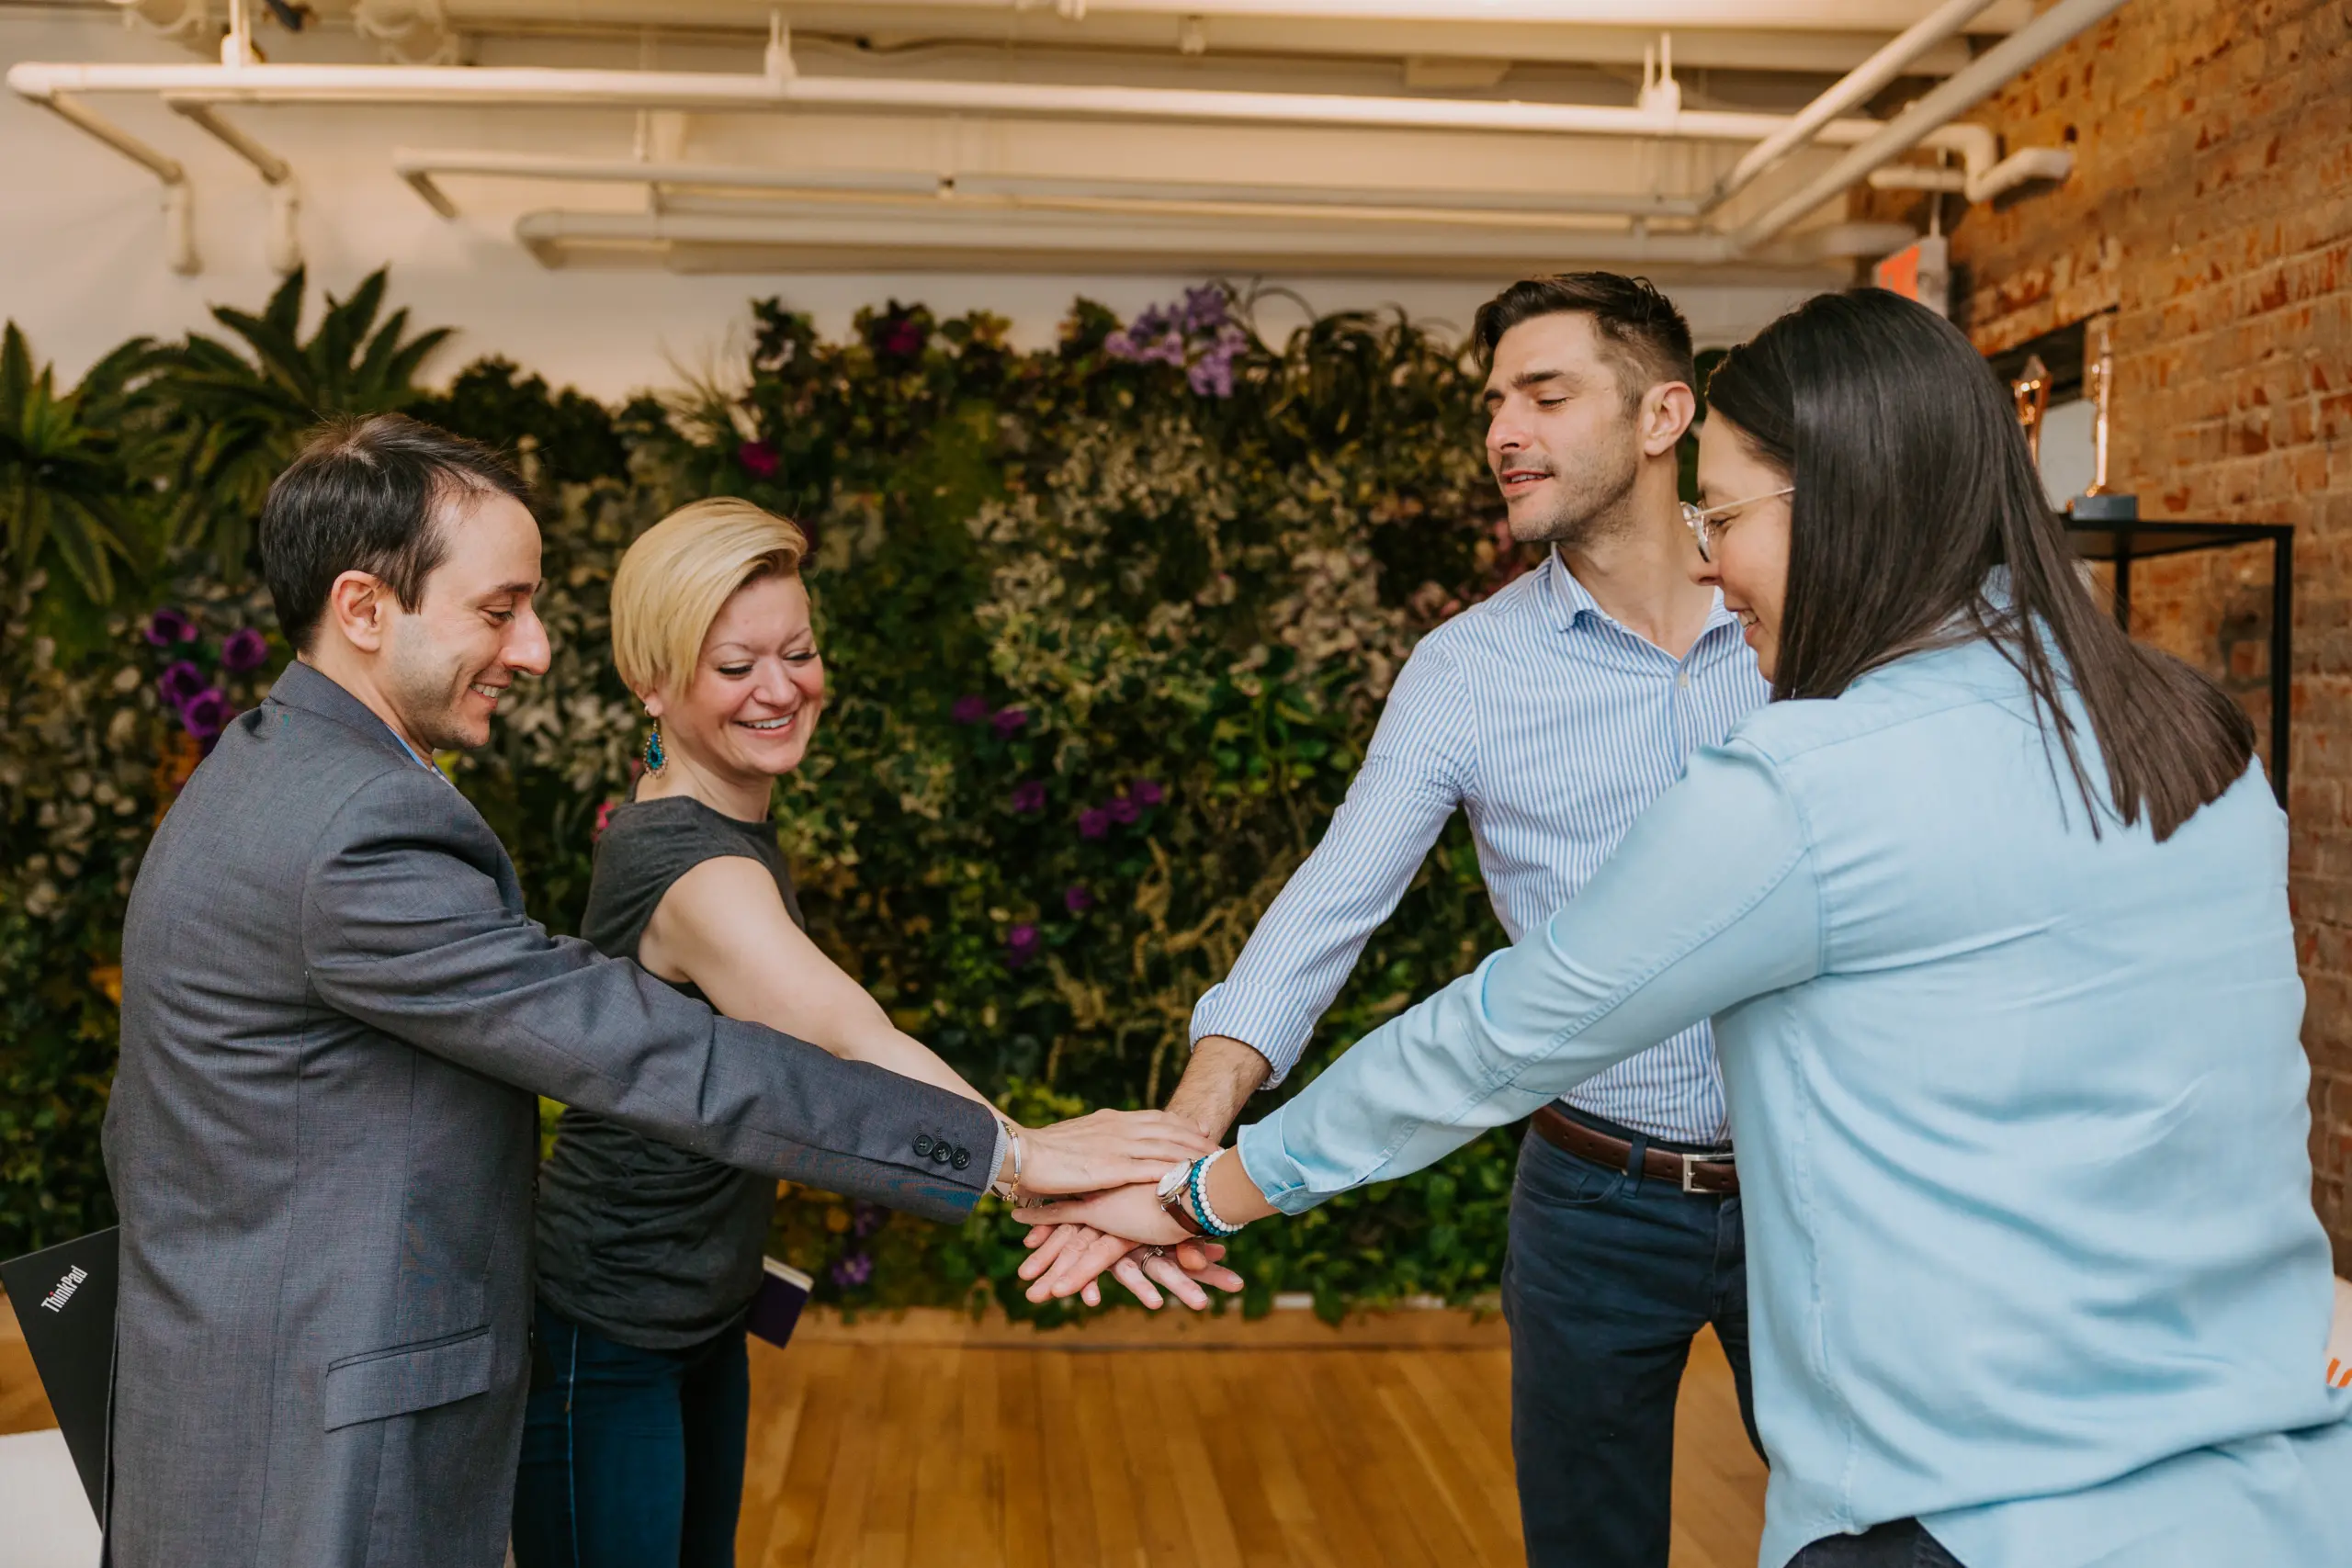 Group of employees in an office doing a team high huddle with hands together.